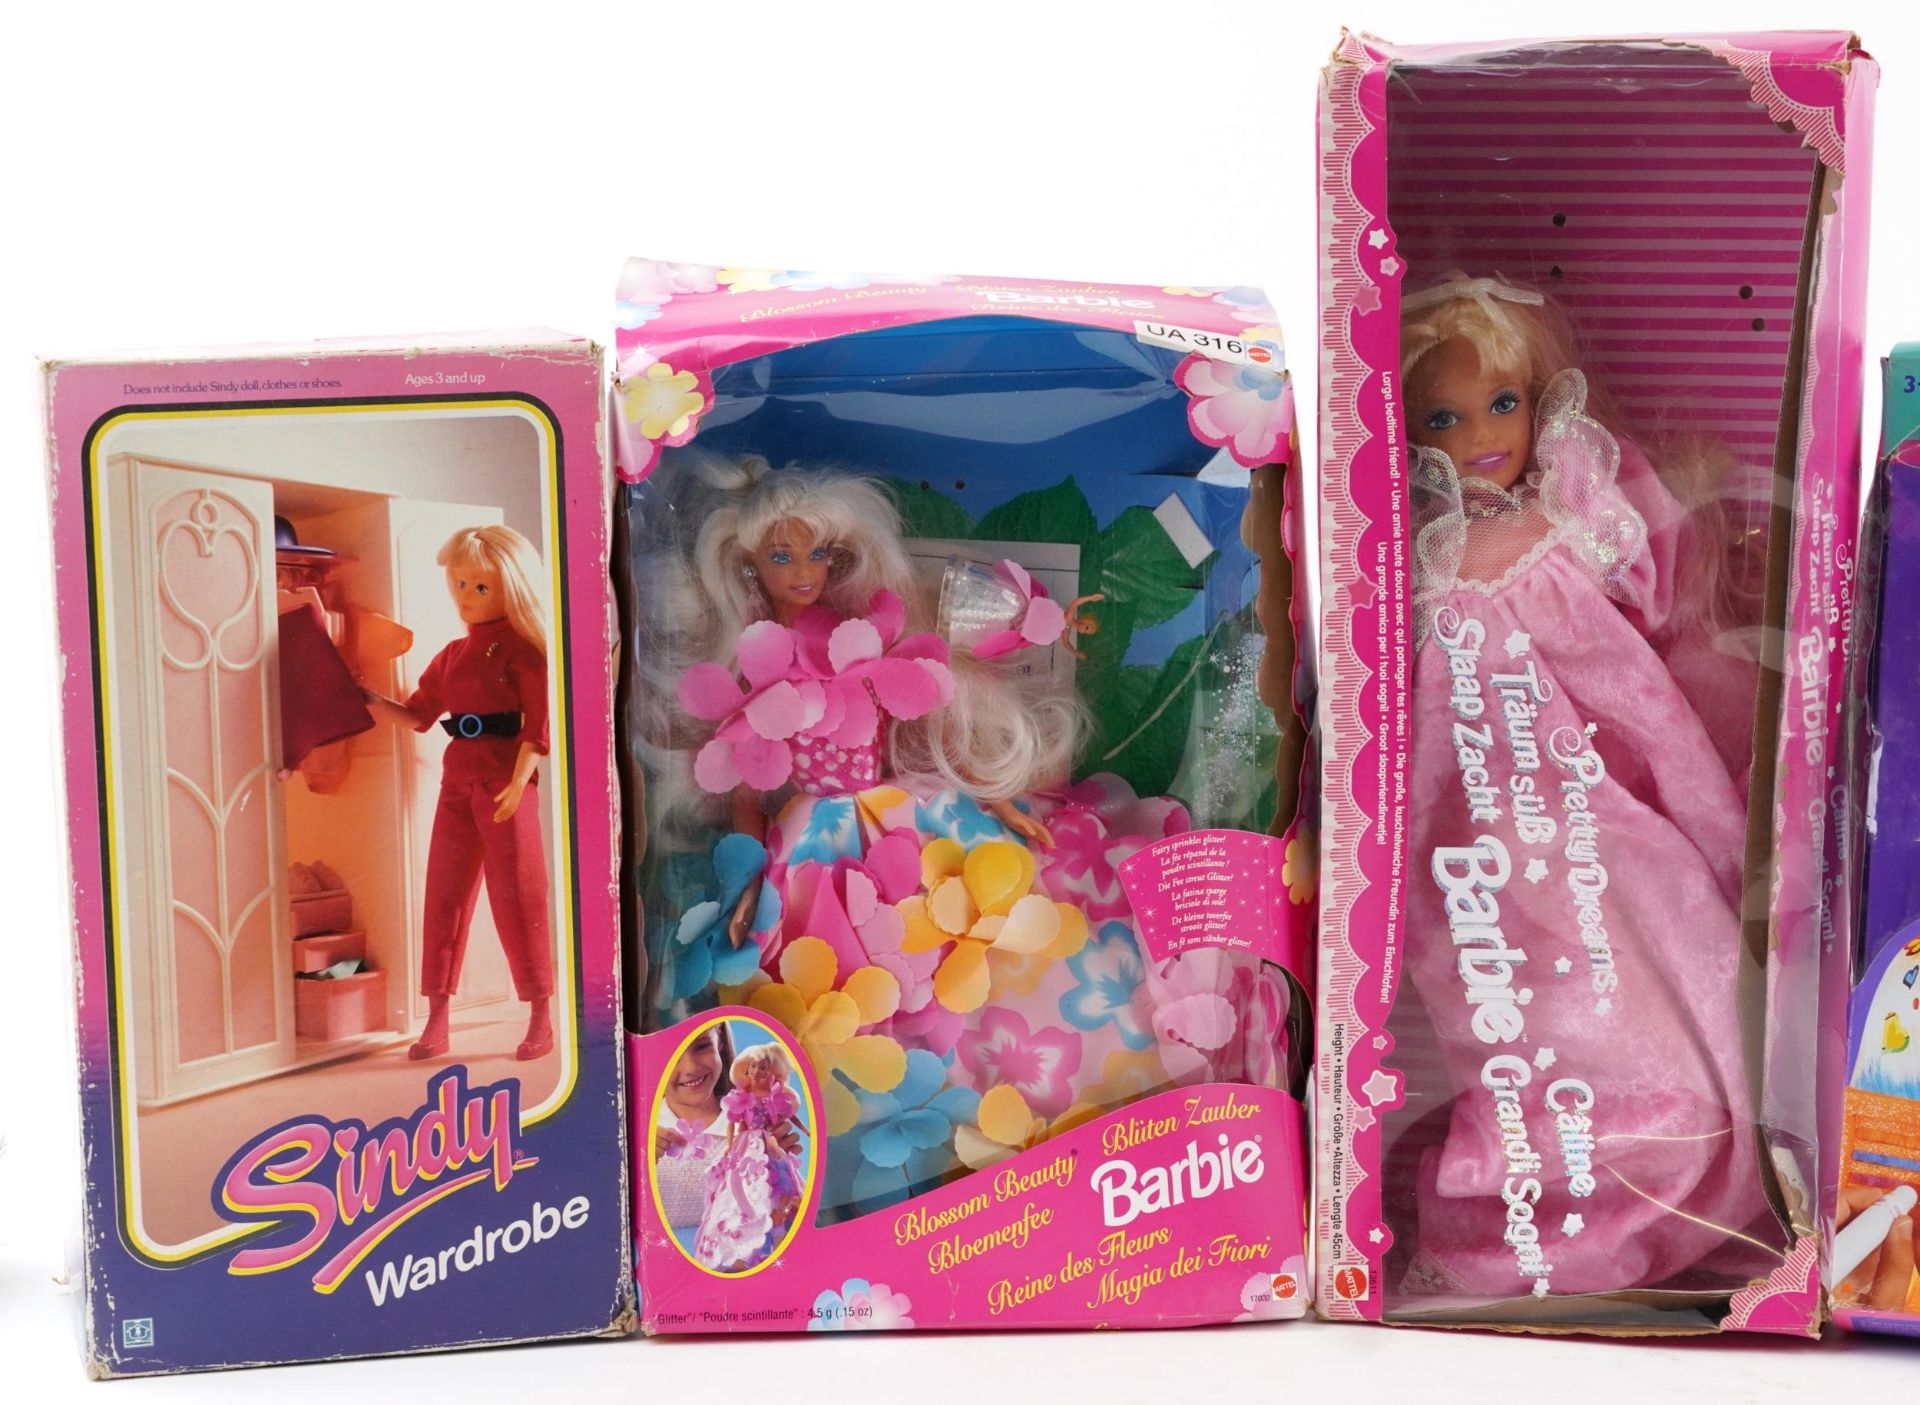 Vintage Barbie and Sindy toys with boxes by Mattel and Hasbro including Sindy Wardrobe, Blossom - Bild 2 aus 3